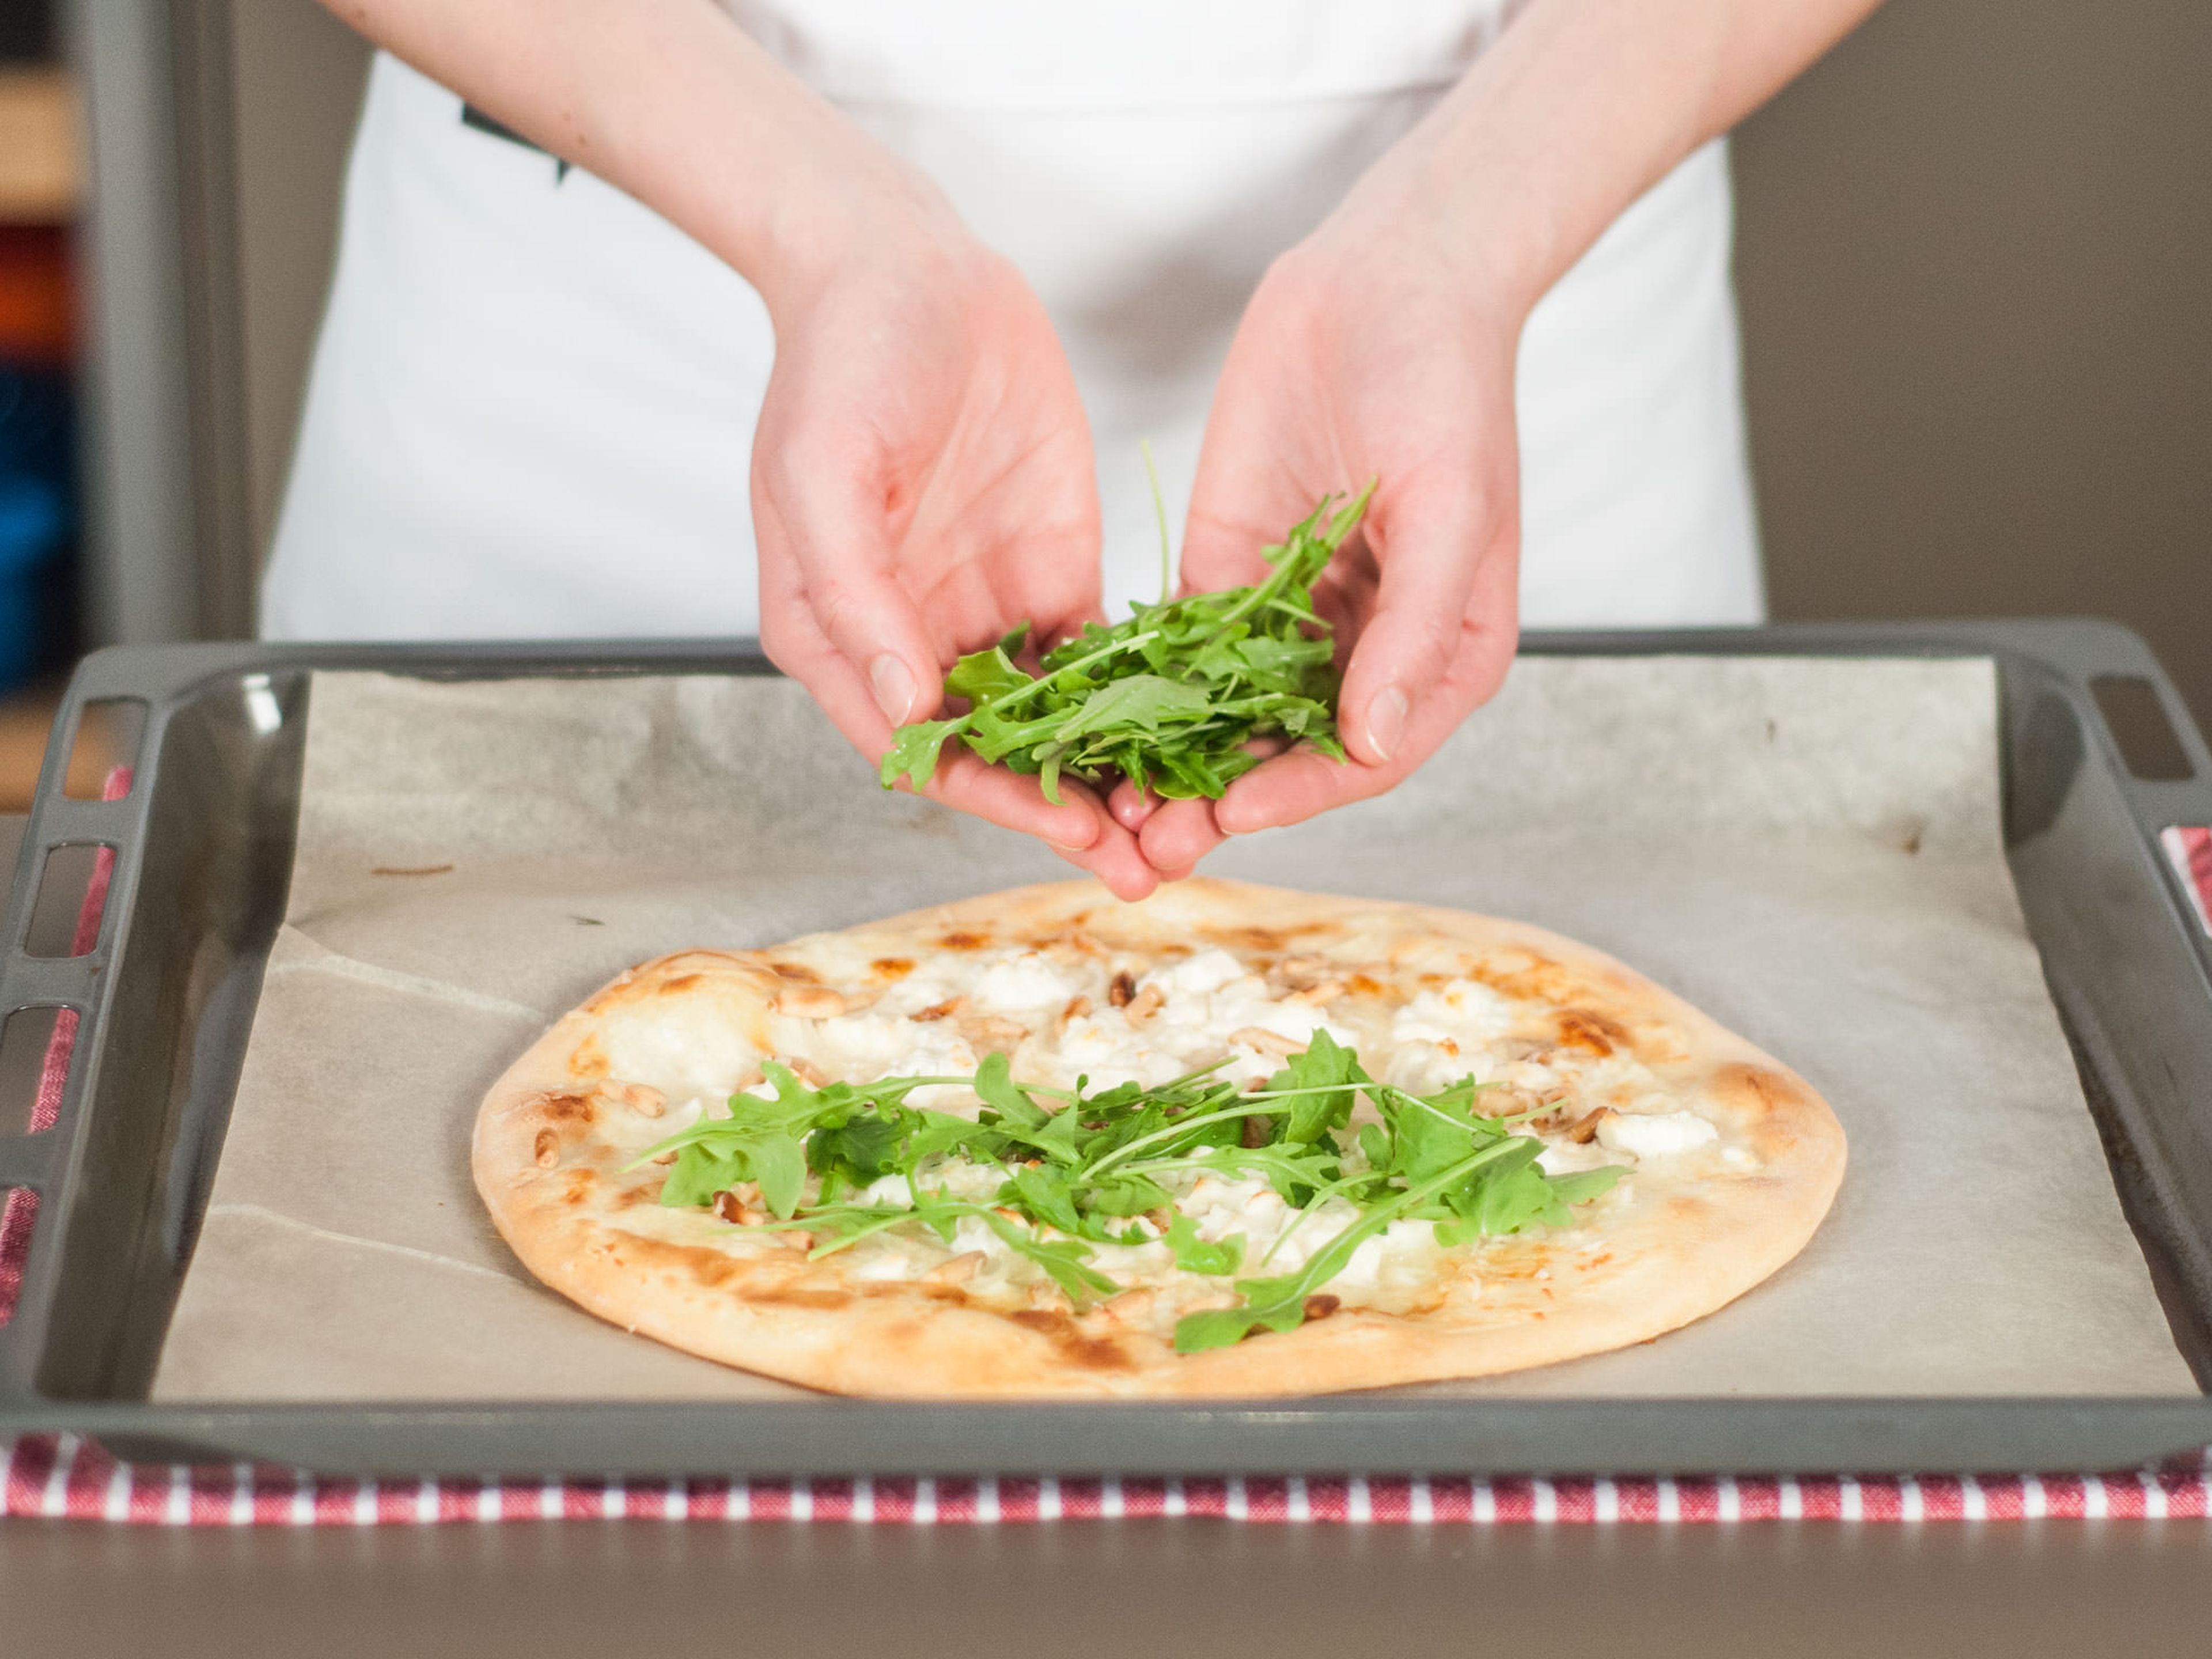 Remove pizza from oven. Season with black pepper and garnish generously with arugula. Enjoy!